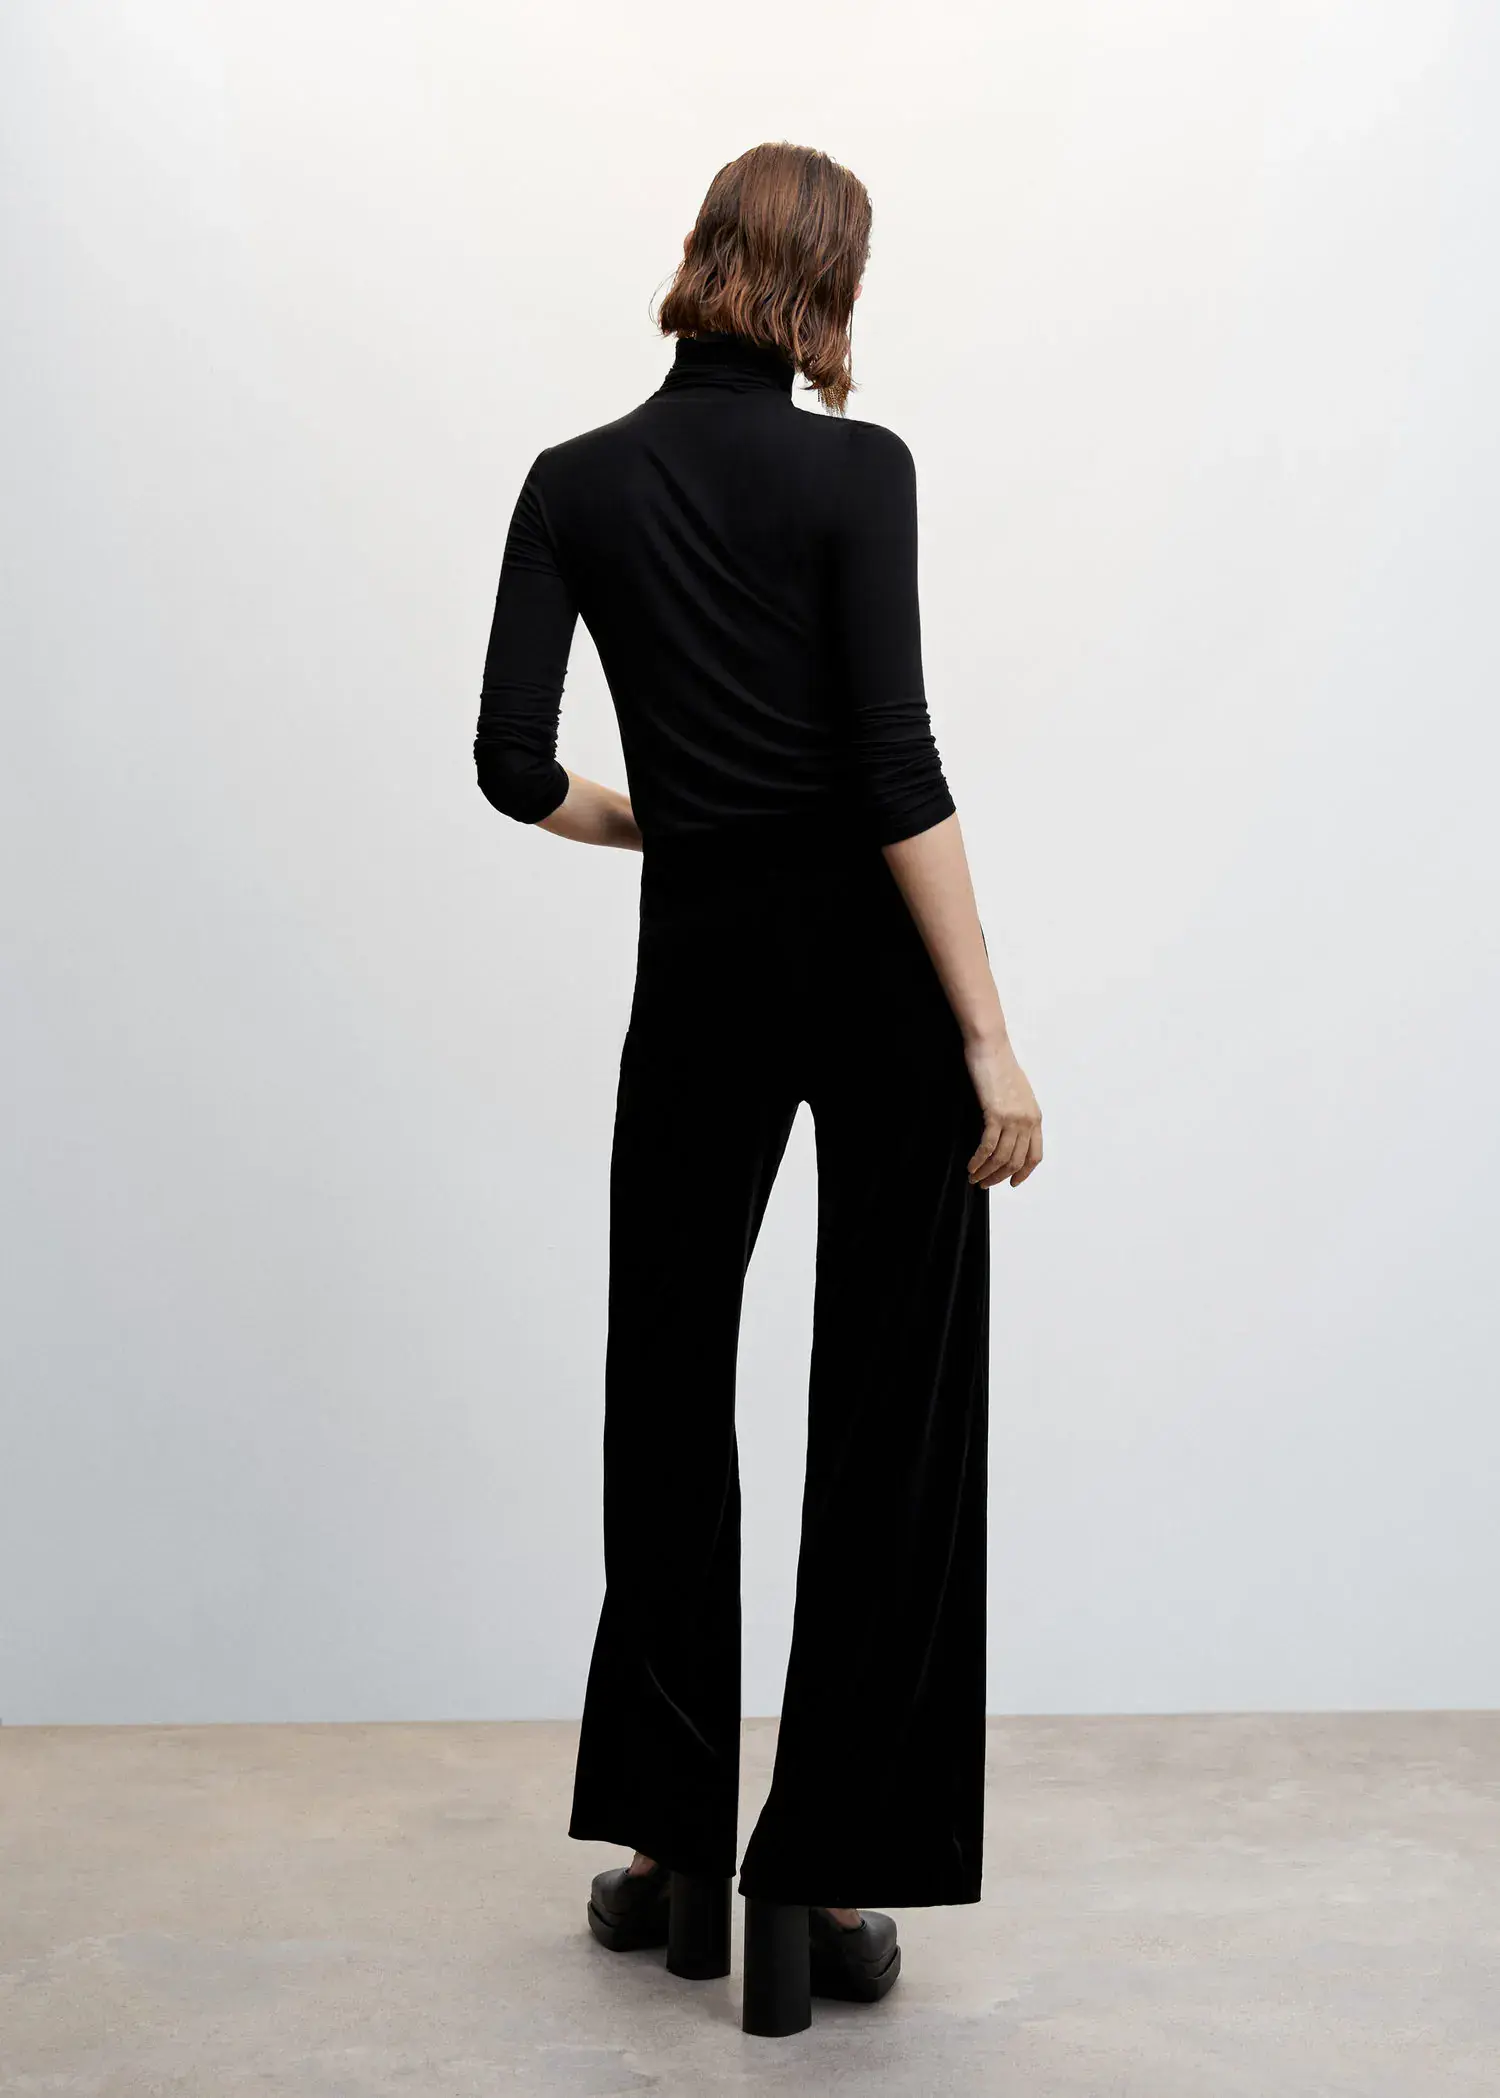 Mango Velvet palazzo pants. a woman wearing a black outfit standing in a room. 